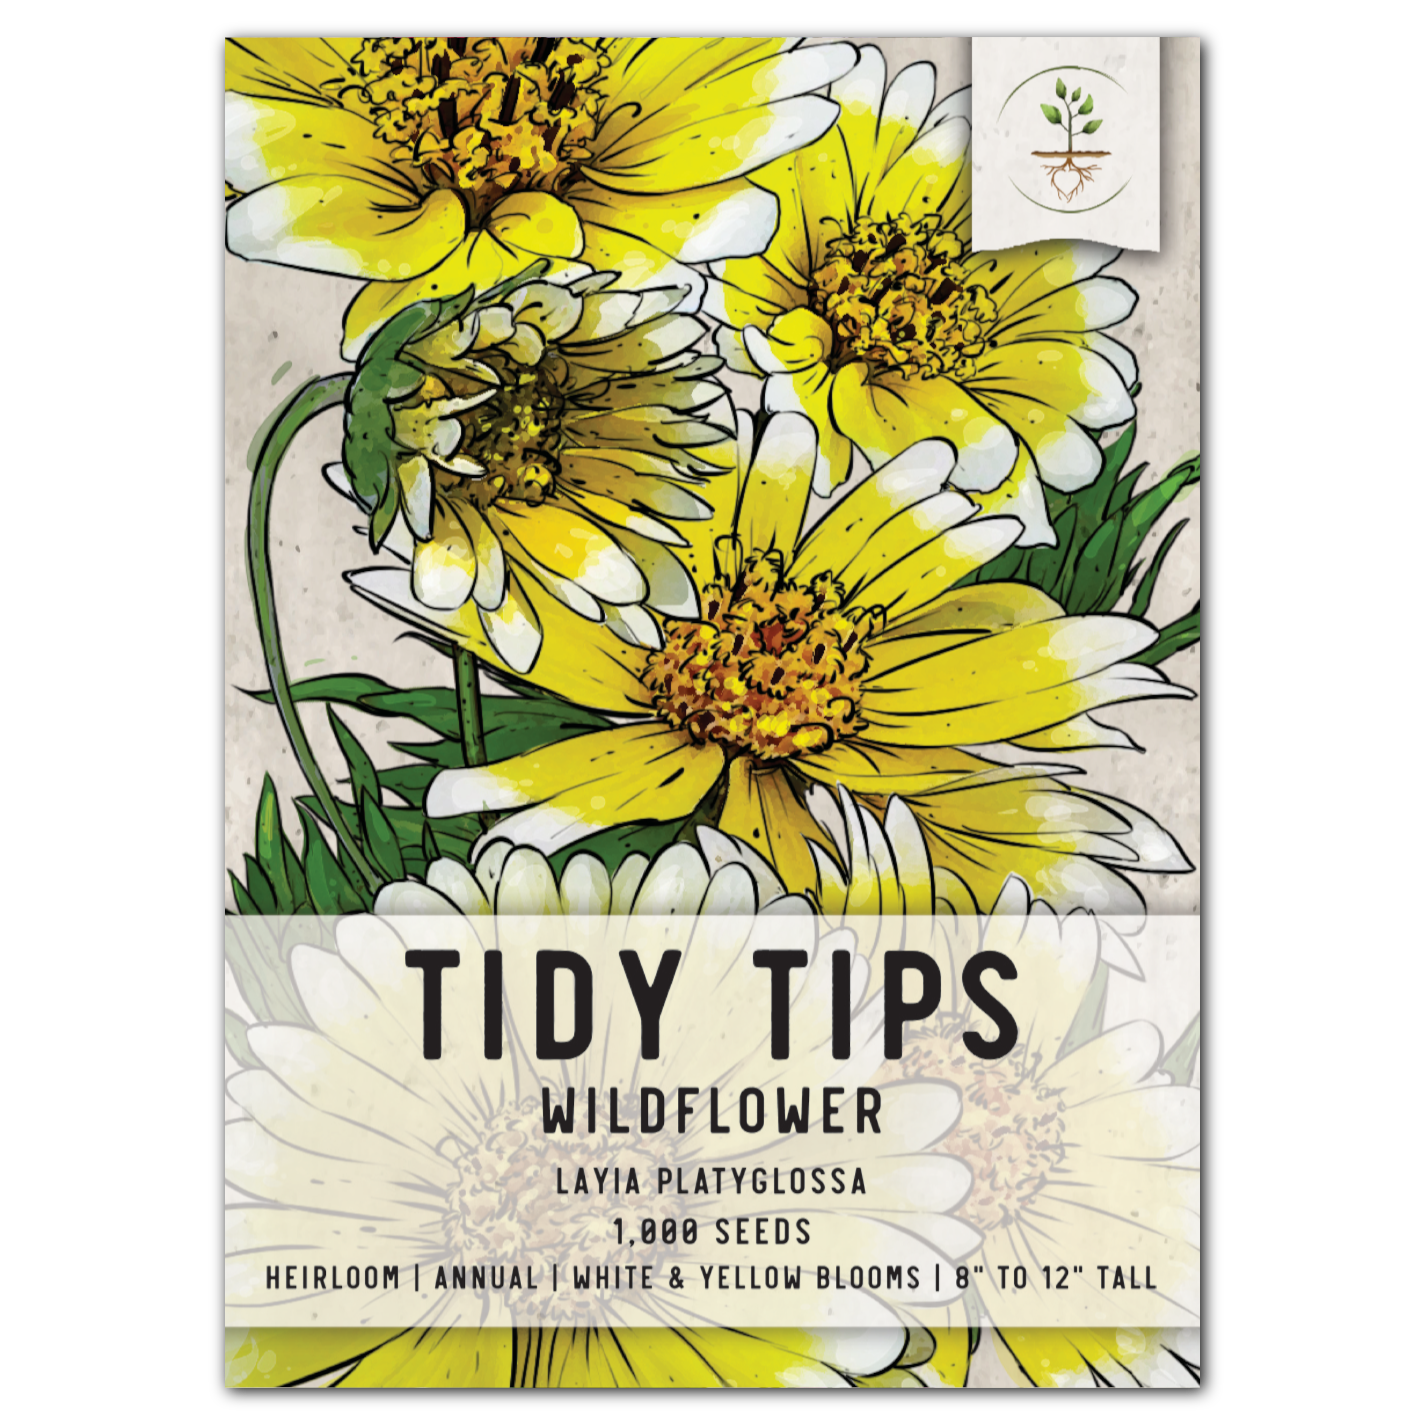 Tidy Tips Seeds For Planting (Layia platyglossa)